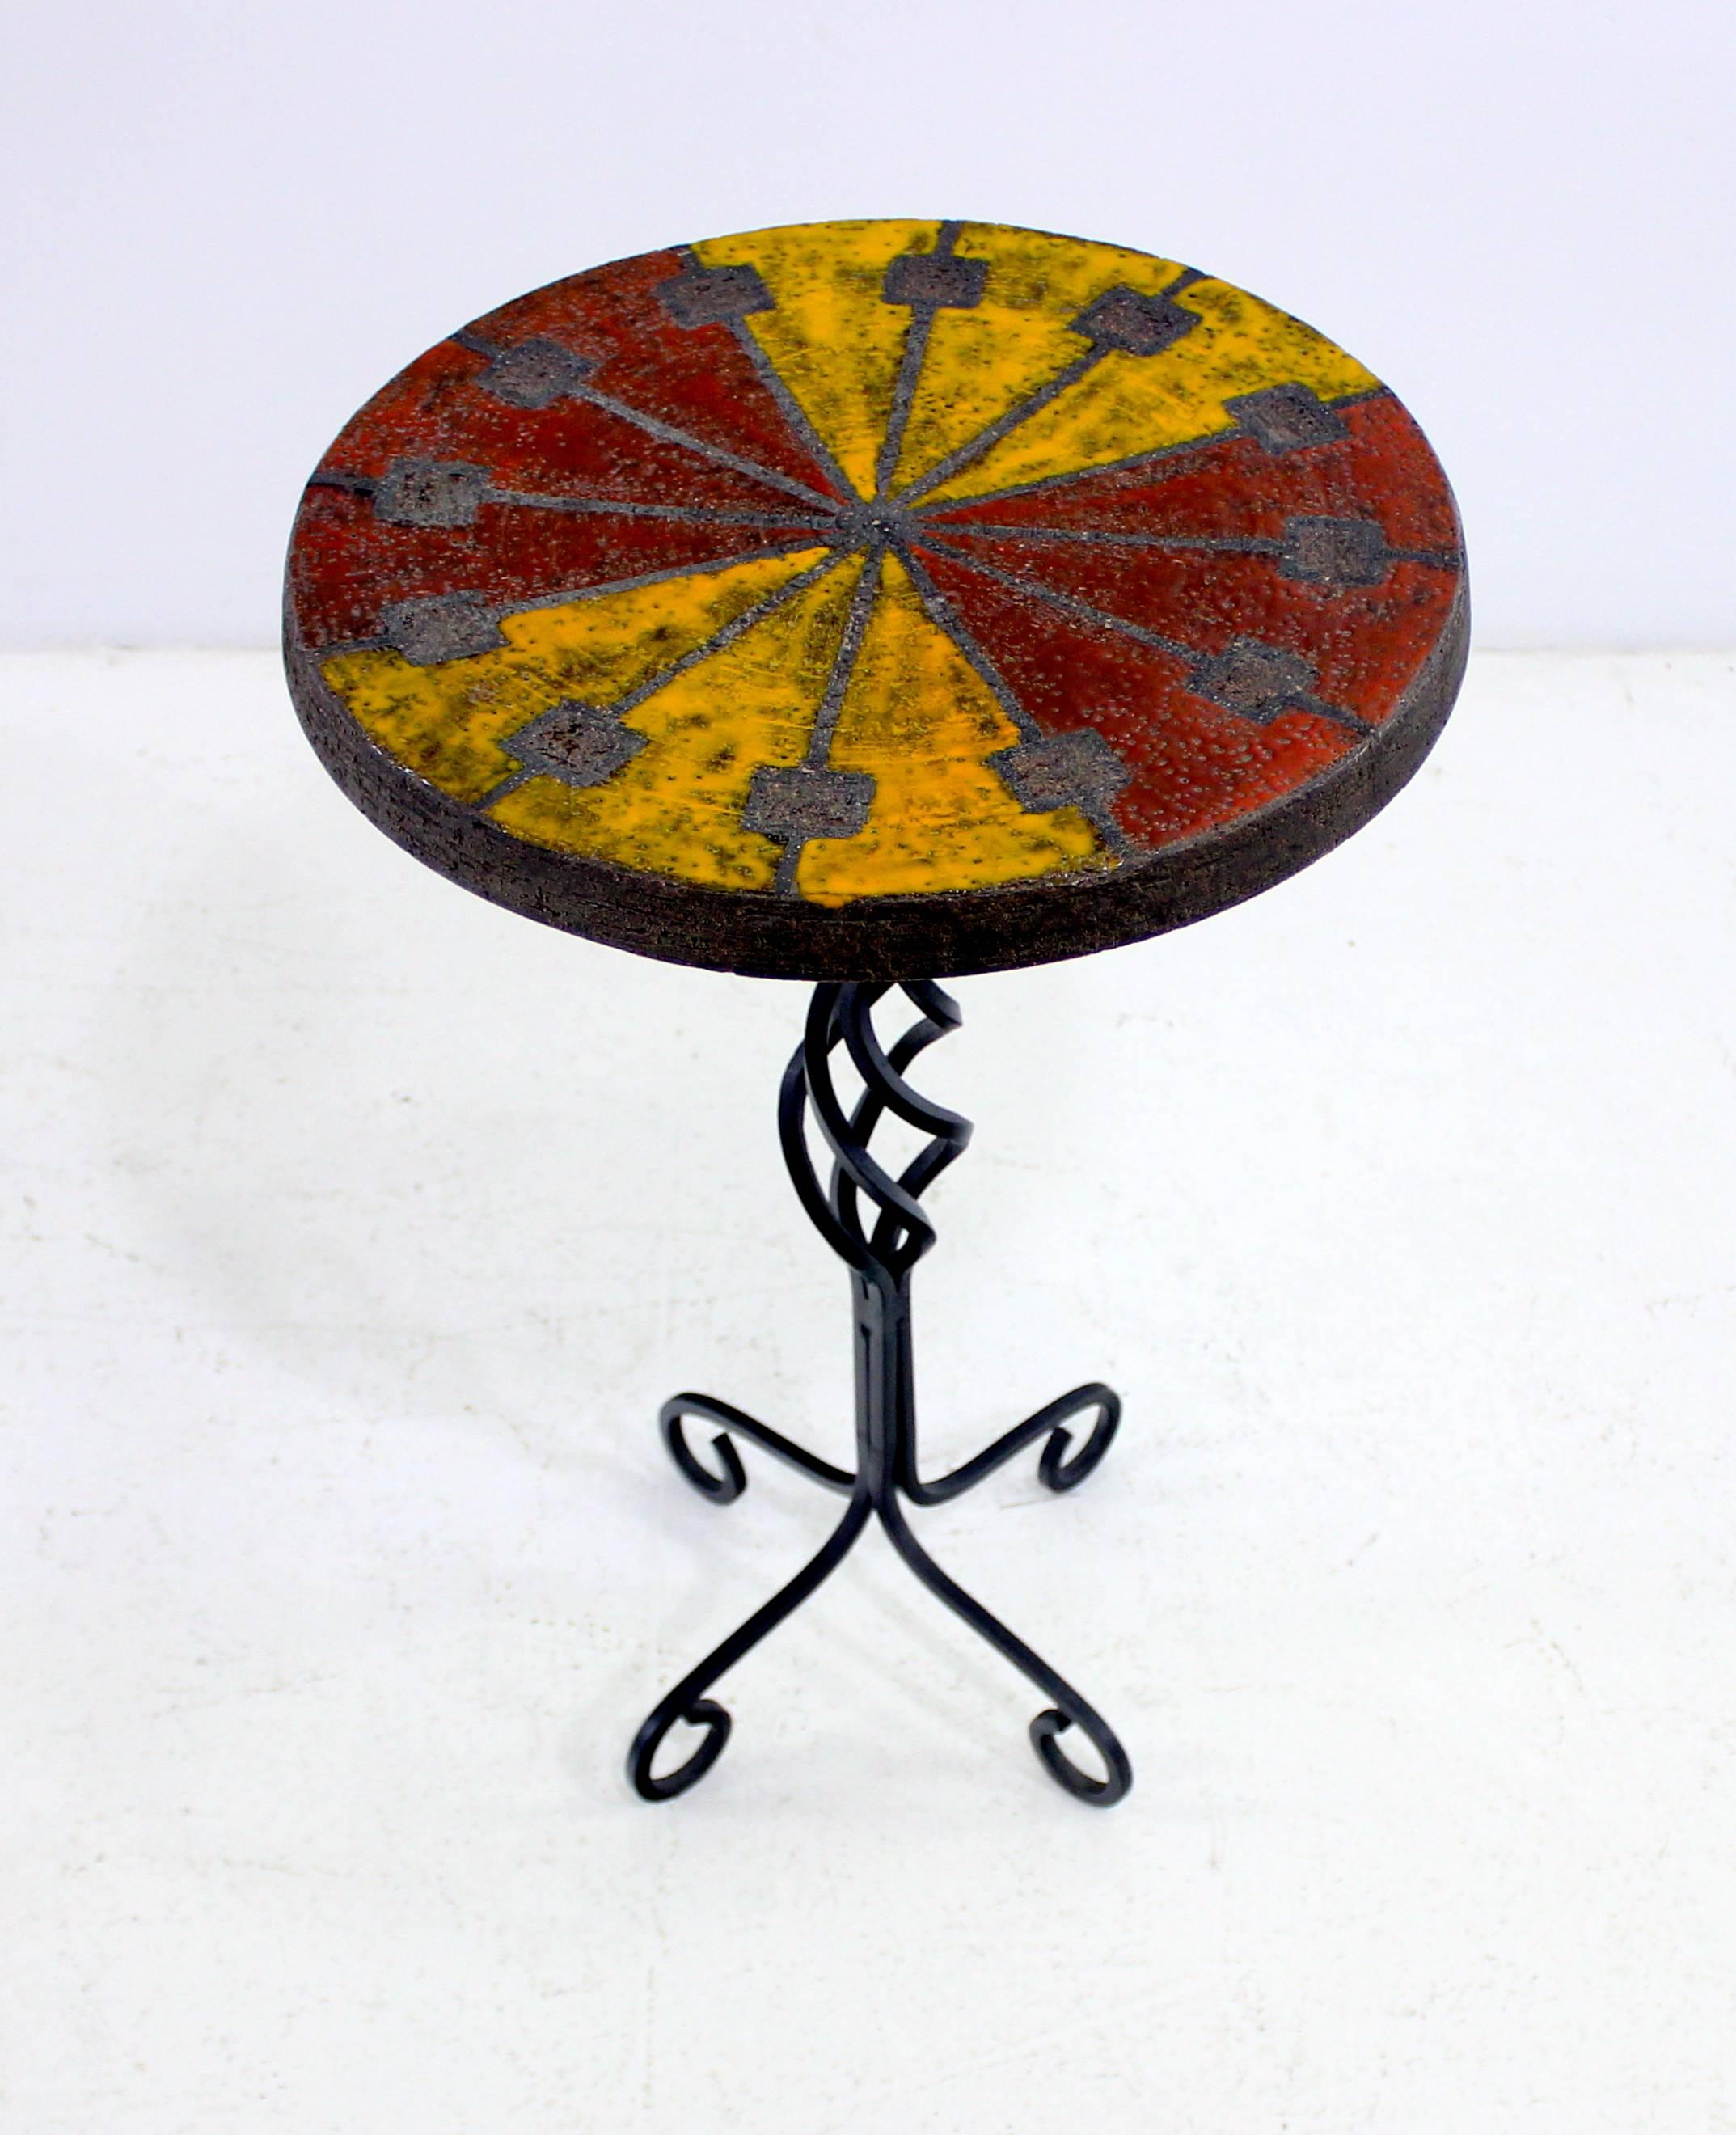 Mid-Century Italian modern by Raymor.
Handcrafted wrought iron base with hand-painted ceramic tile top.
The ultimate jewel of a table, perfect for accessorizing any space.
Matchless quality and price.
Low freight, quick ship.
 